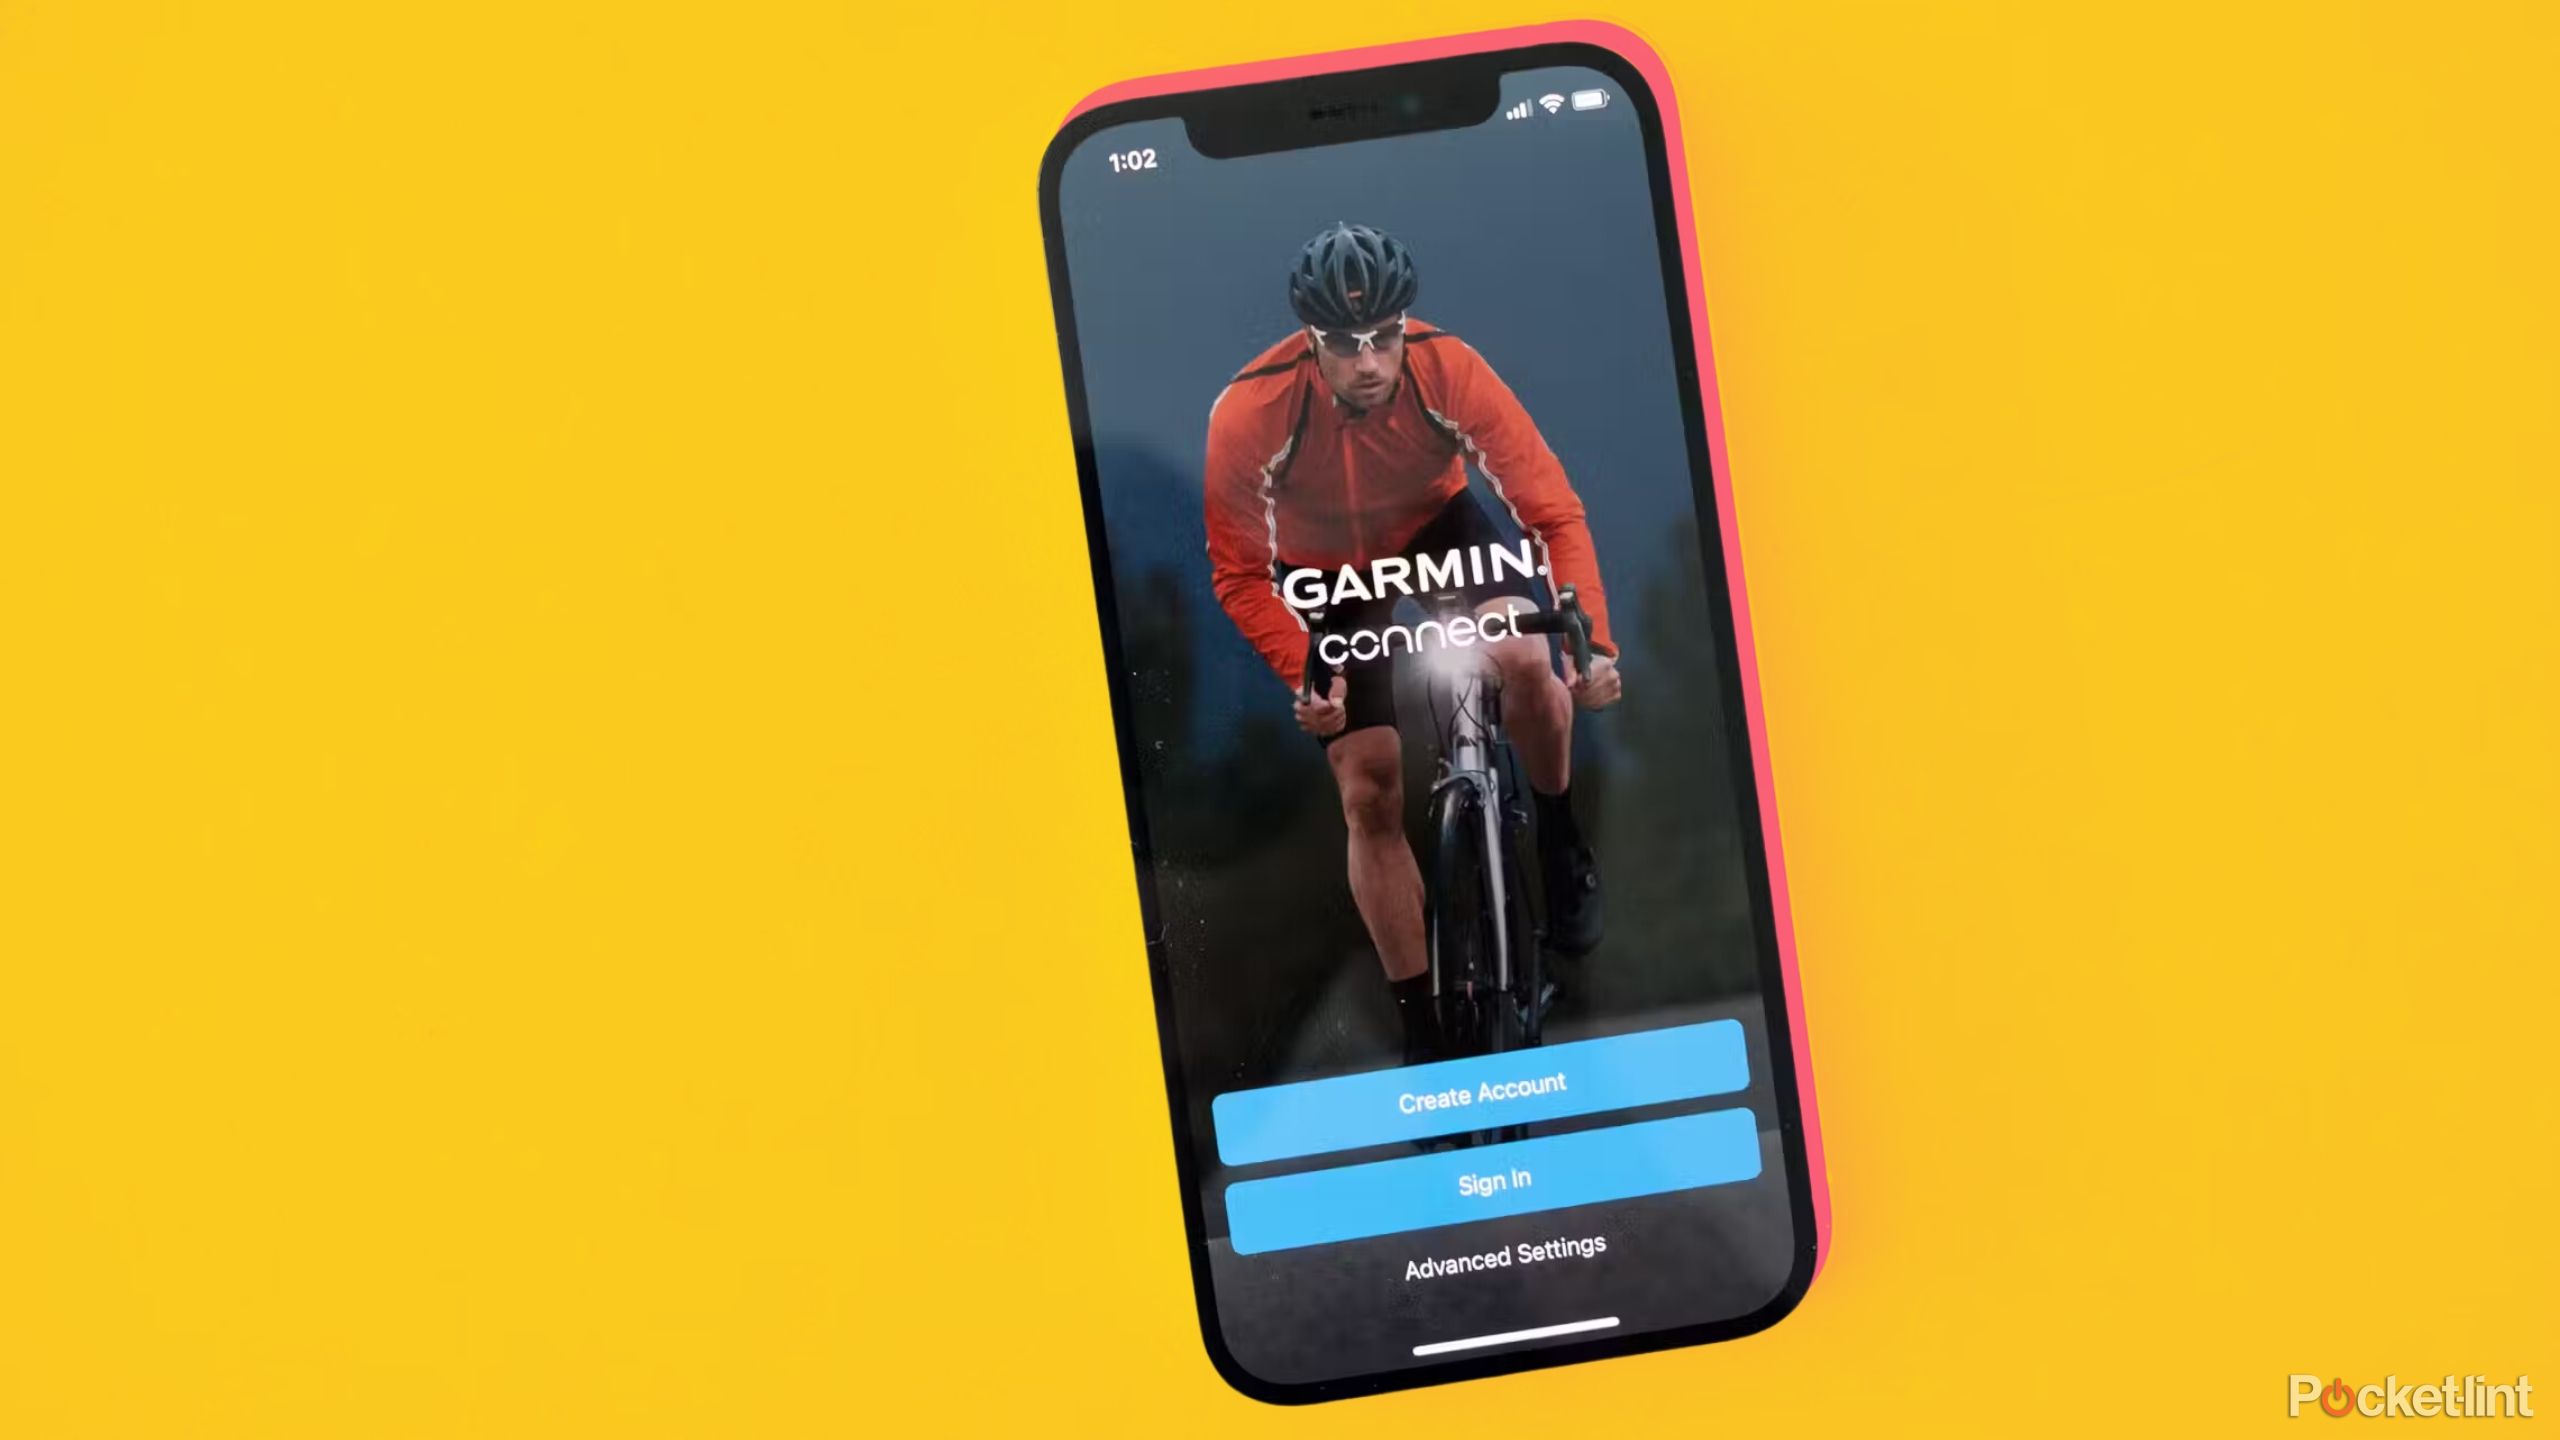 Garmin connect app on phone yellow background